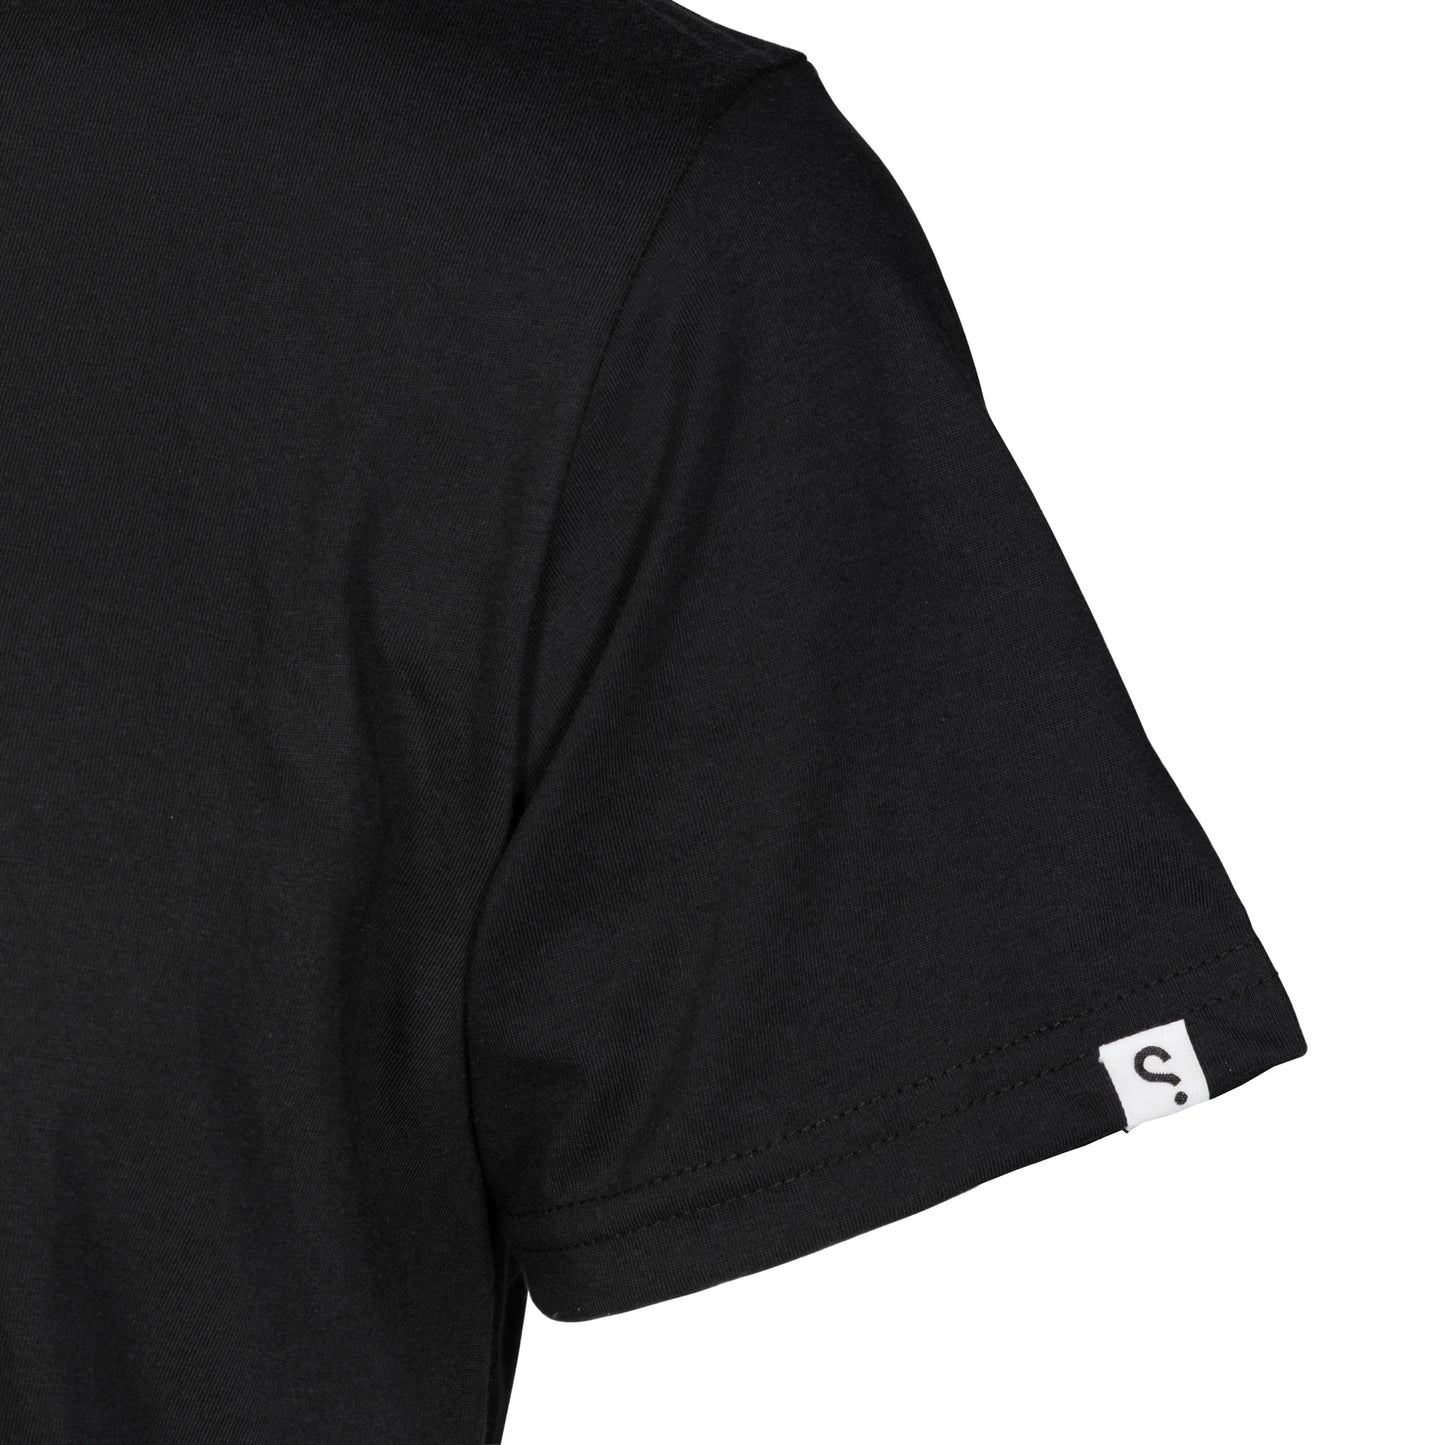 SPYSCAPE Tell the Truth T-Shirt with Hidden Zip Pocket - logo sleeve tag